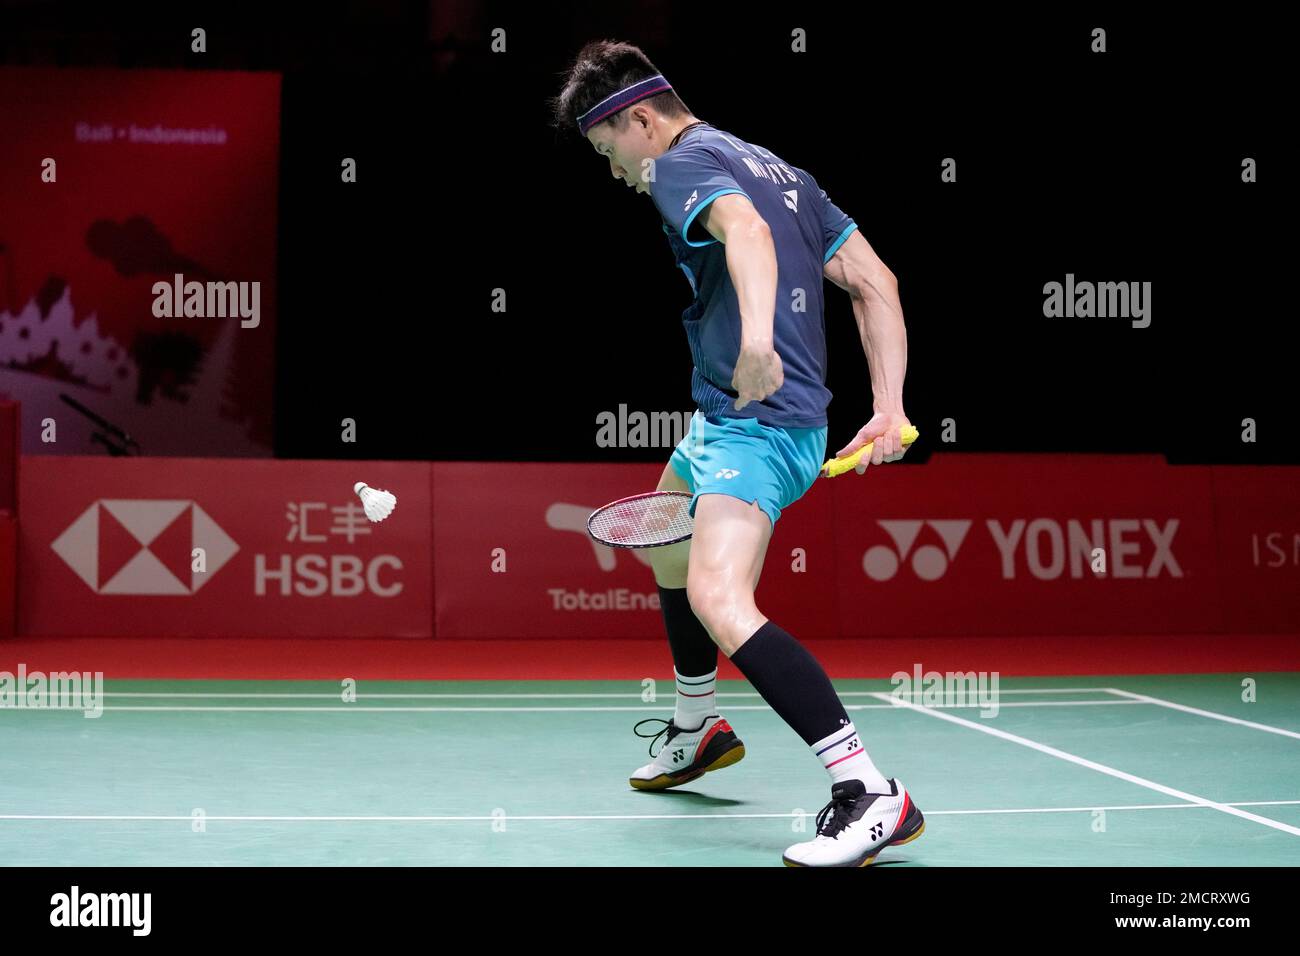 Malaysias Lee Zii Jia returns the shuttlecock fro between his legs as he competes against Thailands Kunlavut Vitidsarn during their mens singles Group B badminton match at the BWF World Tour Finals